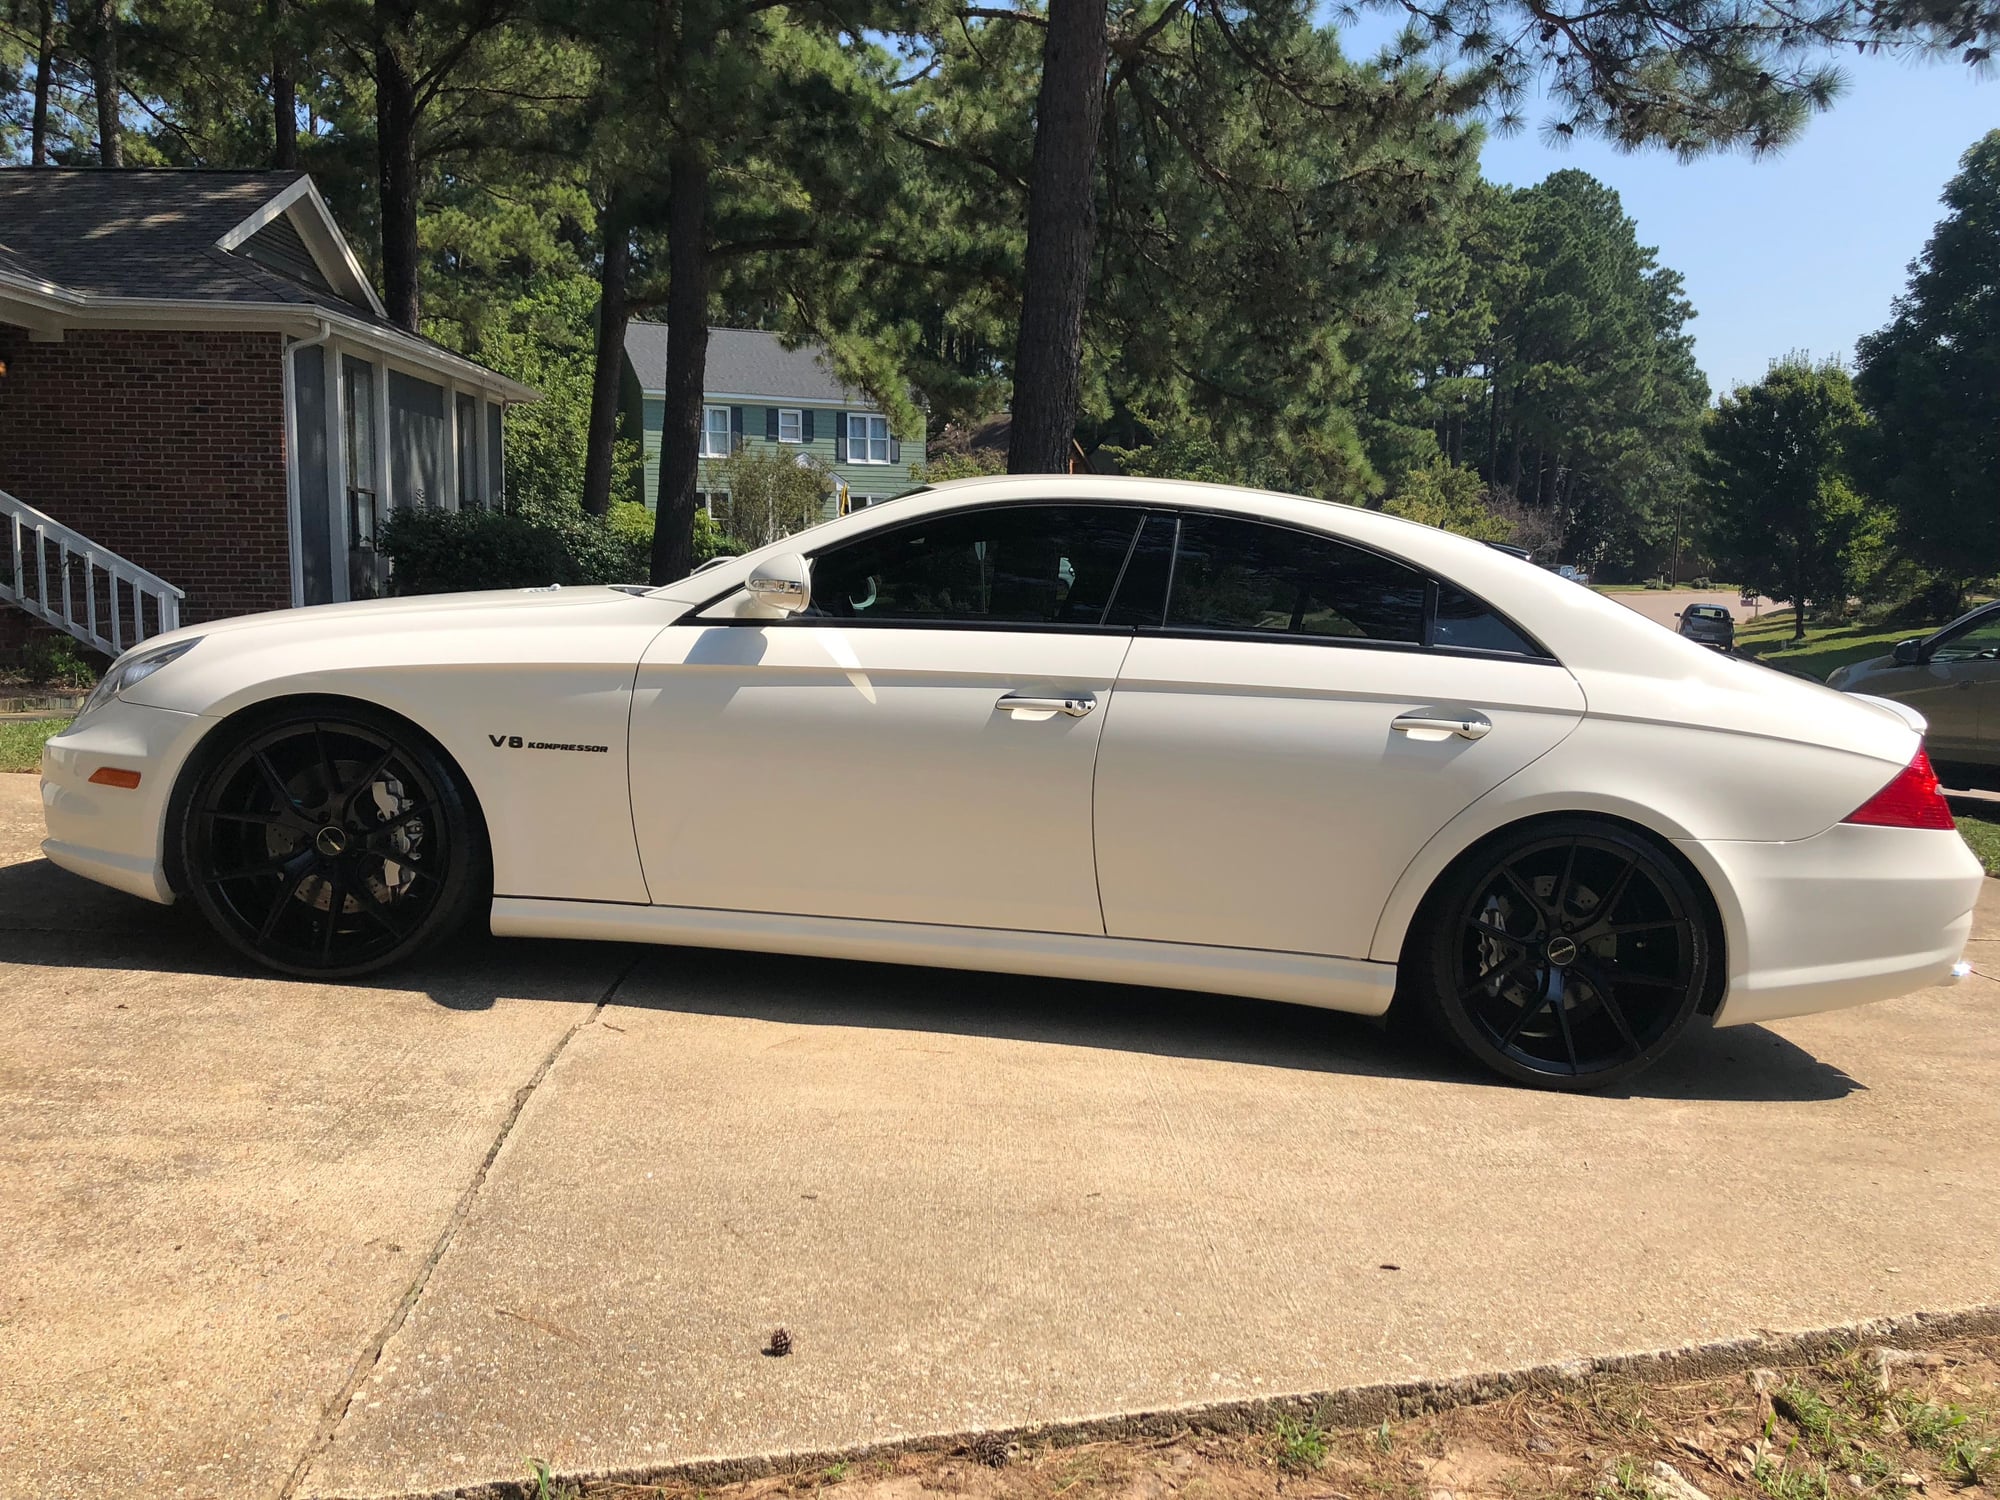 2006 Mercedes-Benz CLS55 AMG - 2006 Mercedes CLS55 AMG White in excellent condition and low miles - Used - VIN WDDDJ76XX6A016825 - 68,000 Miles - 8 cyl - 2WD - Automatic - Sedan - White - Raleigh, NC 27615, United States